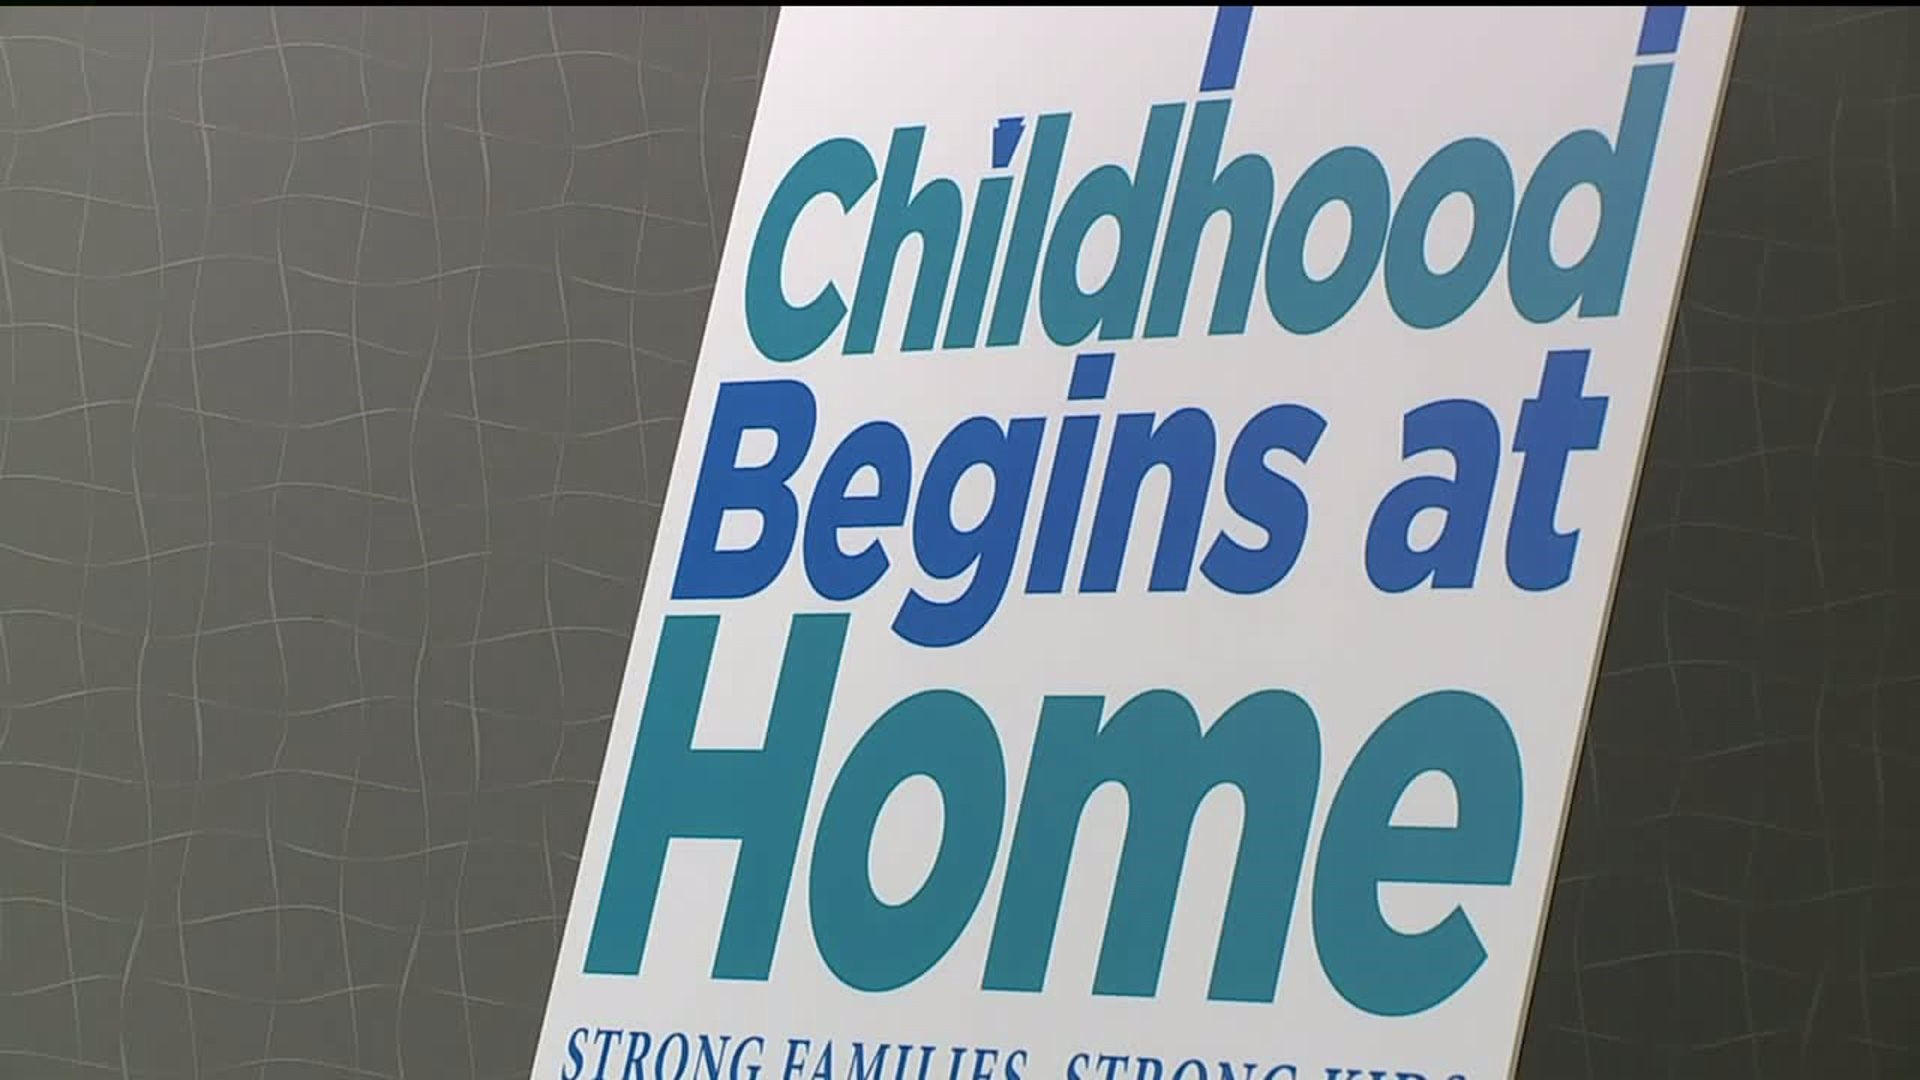 `Childhood Begins at Home` - Helping Families Where They Live